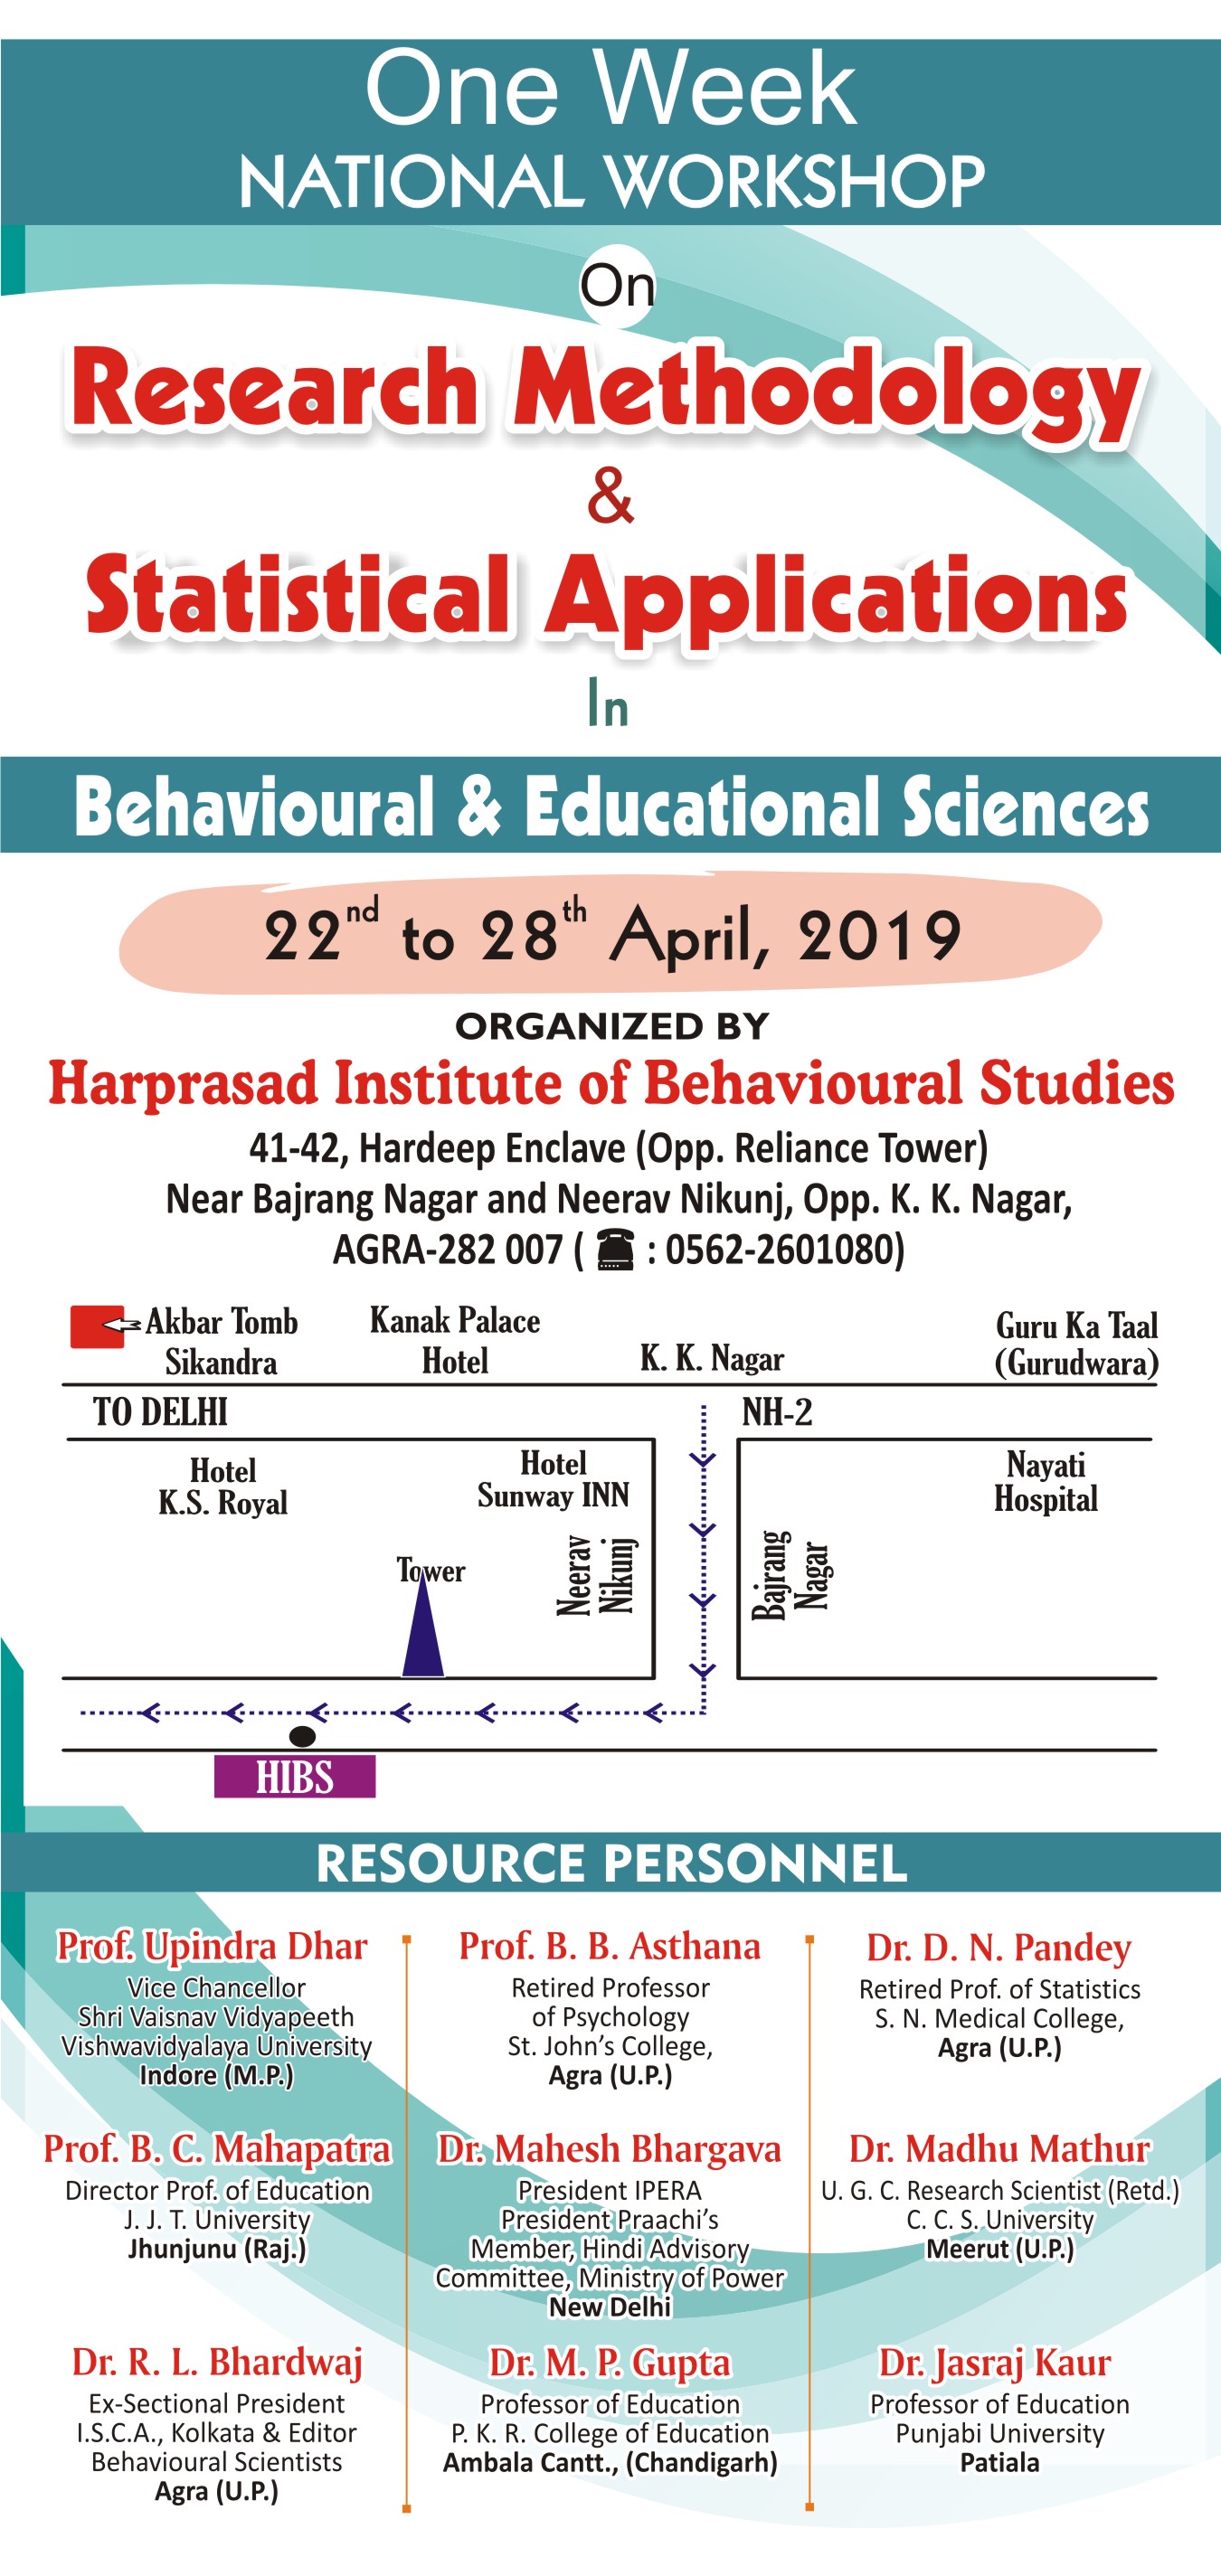 RESEARCH-METHODOLOGY-STATISTICAL-APPLICATIONS-IN-BEHAVIOURAL-EDUCATIONAL-SCIENCES